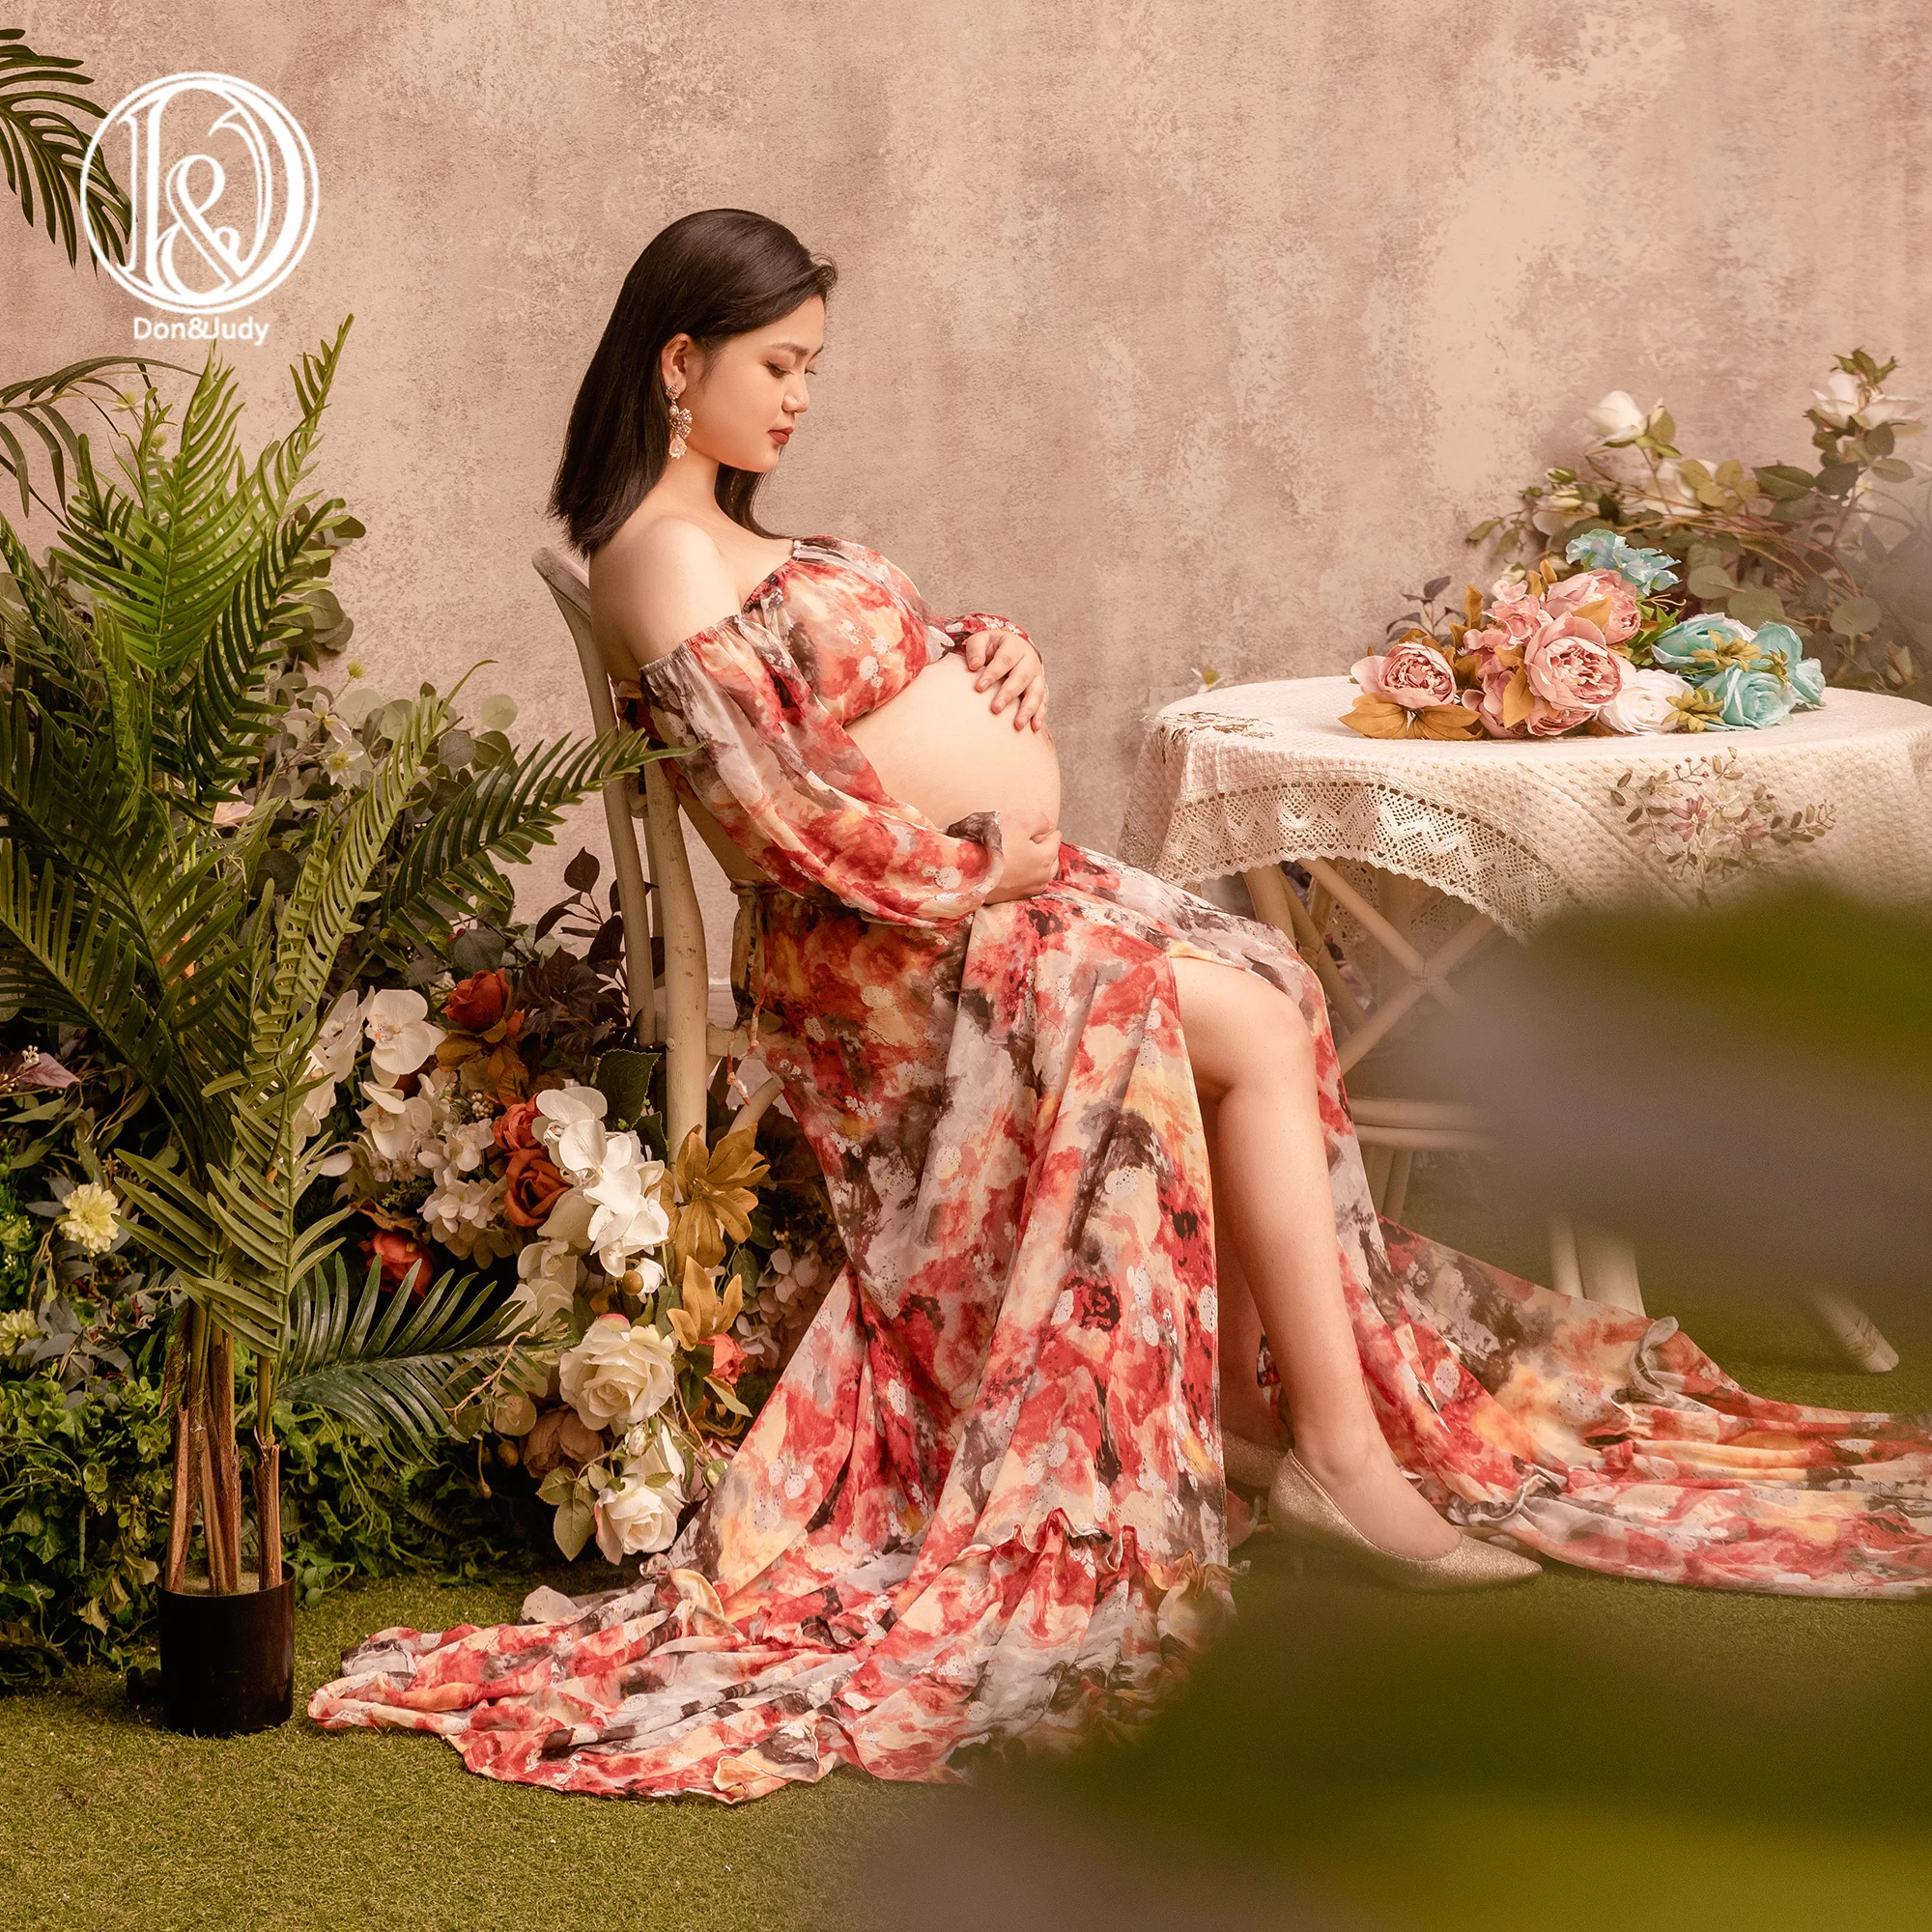 Don&Judy 2 Pieces Gown Sexy Shoulderless Maternity Dresses Photo Shoot Maxi Clothes Split Woman Pregnant Photography Prop 2022